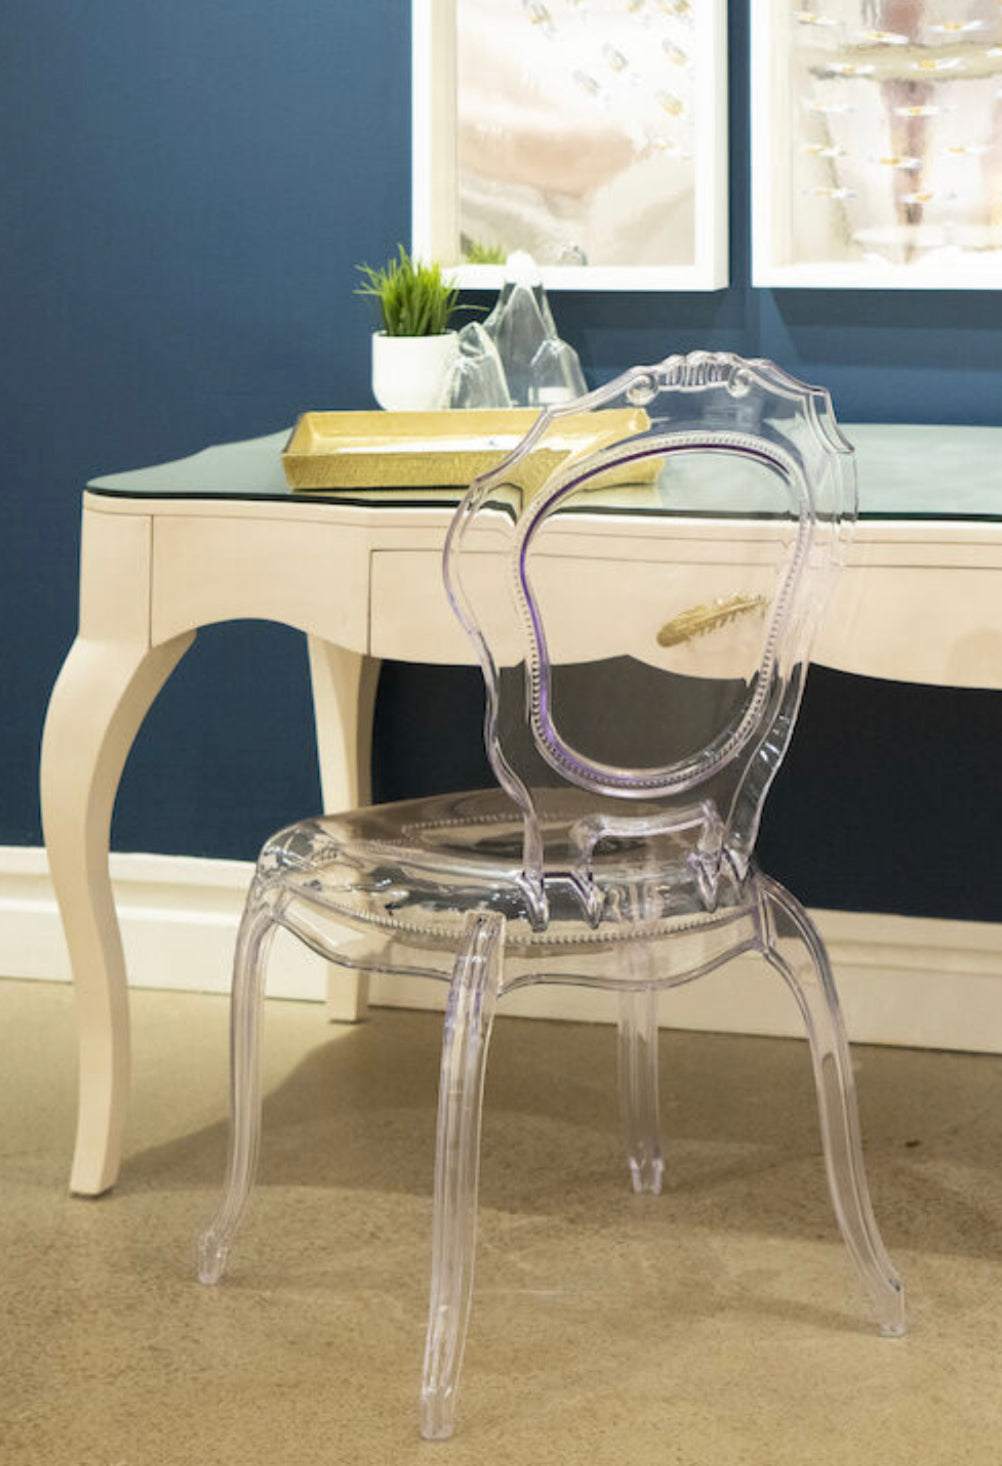 With silhouettes ranging from traditional to modern, classic to innovative, our chairs combine function and form to elevate every room in the house and provide the perfect finishing touch.